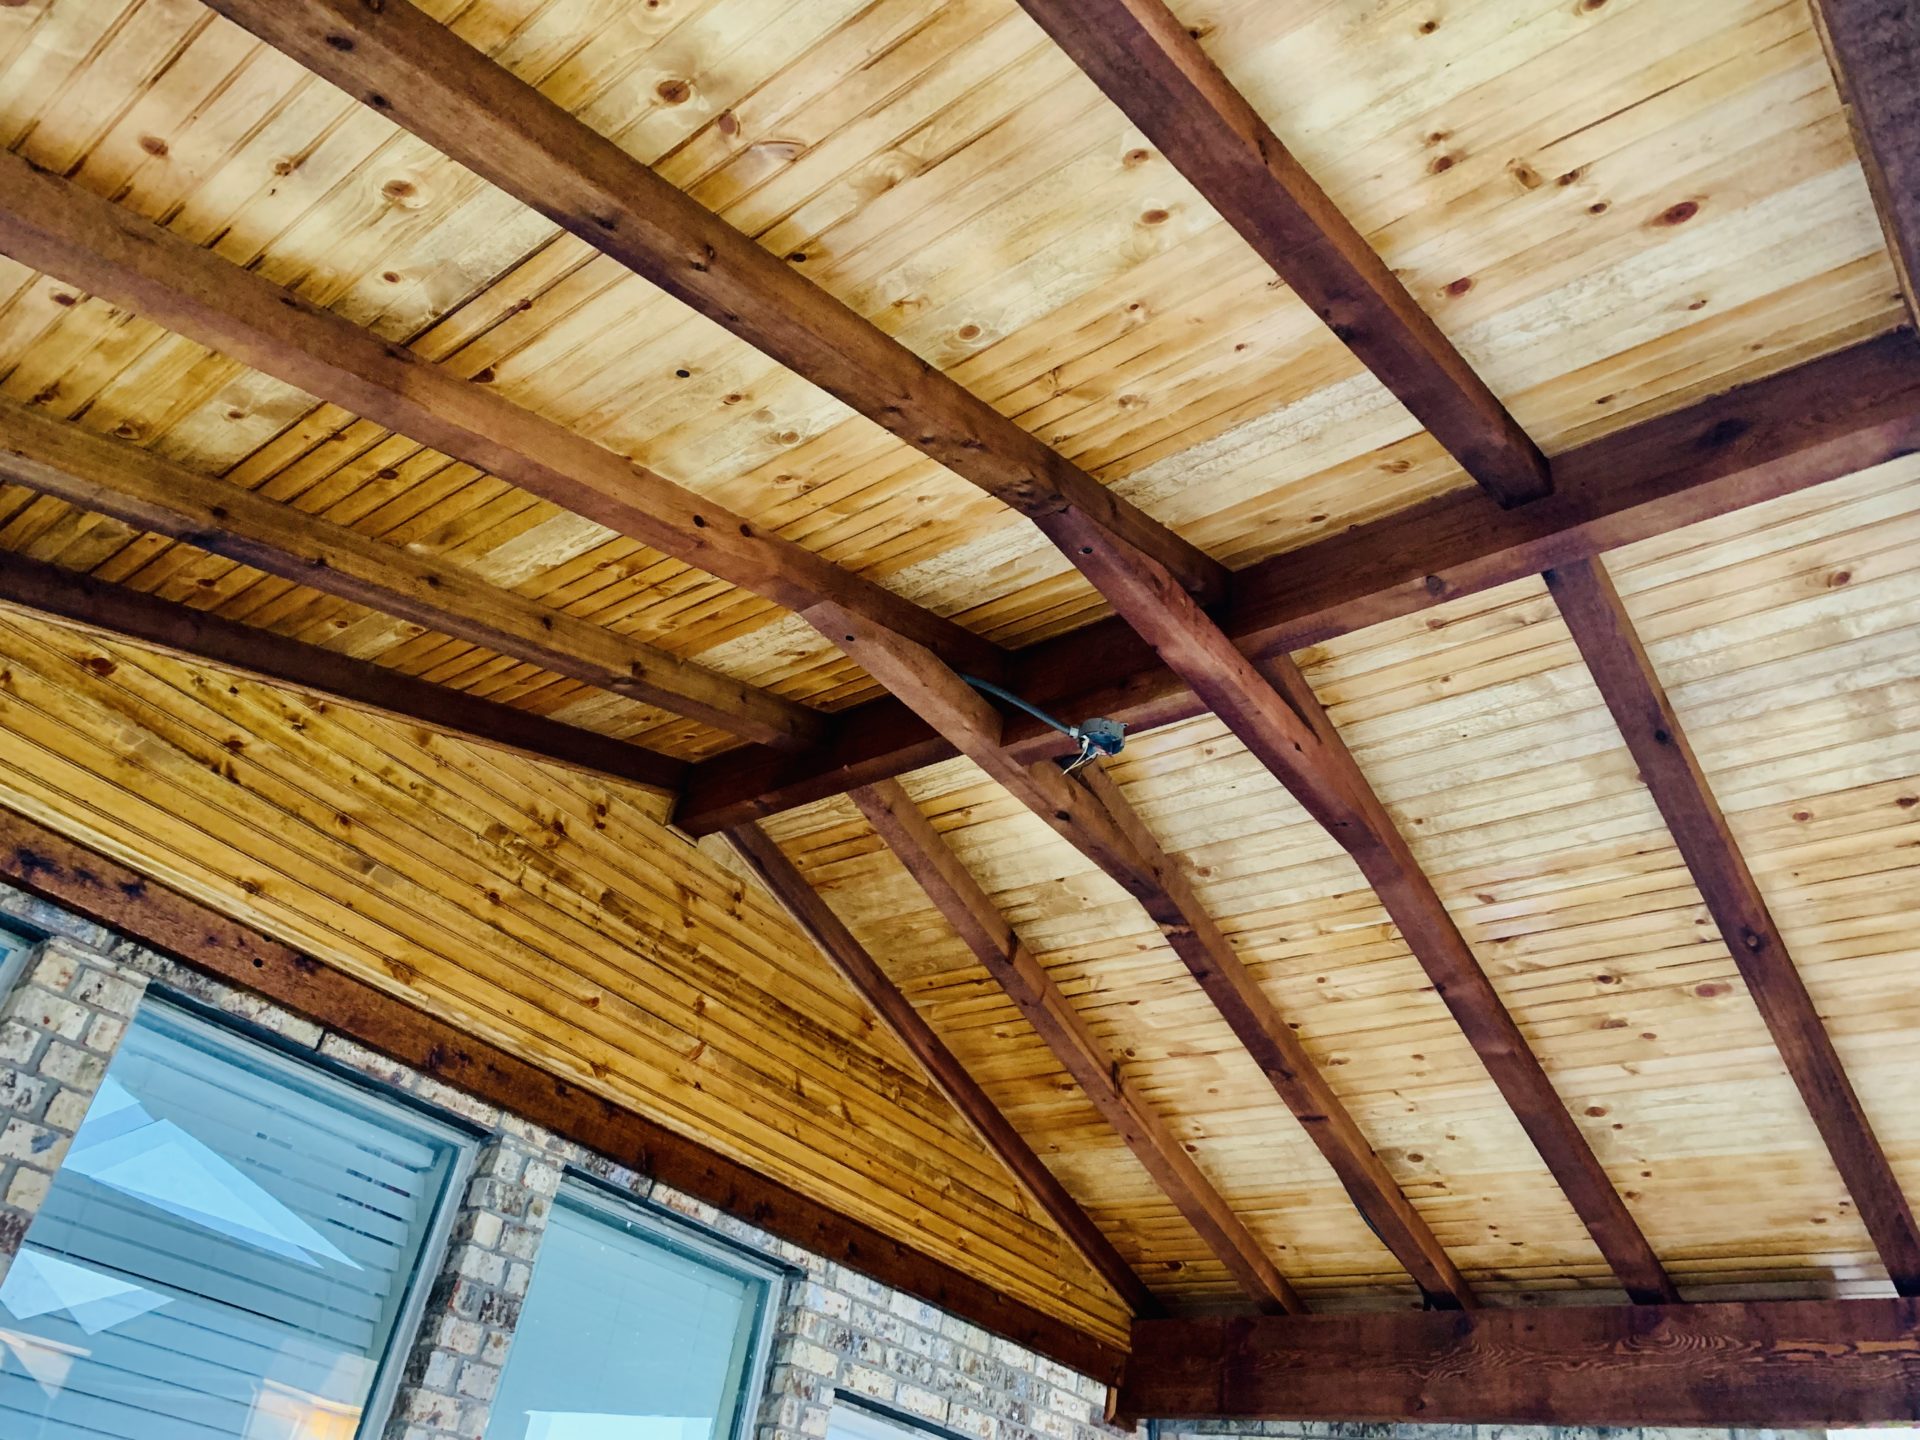 Underneath of a pavilion patio styled roof with beautiful wooden cross beams.